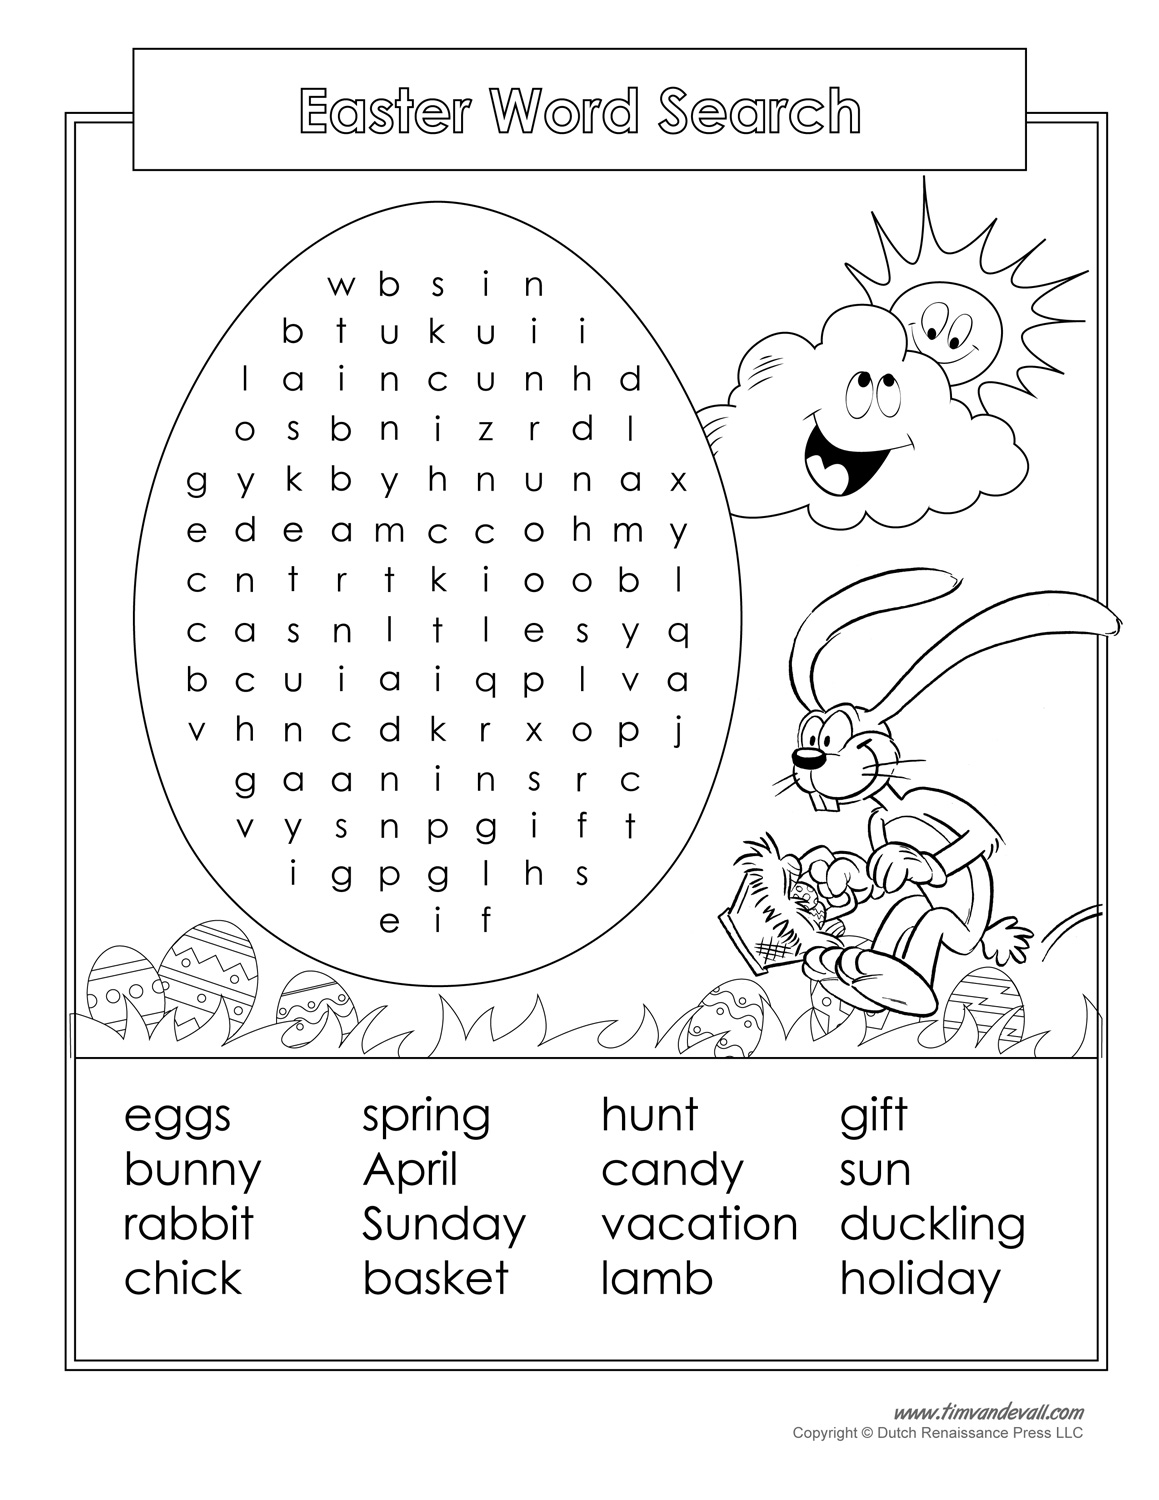 Easter coloring pages and word searches